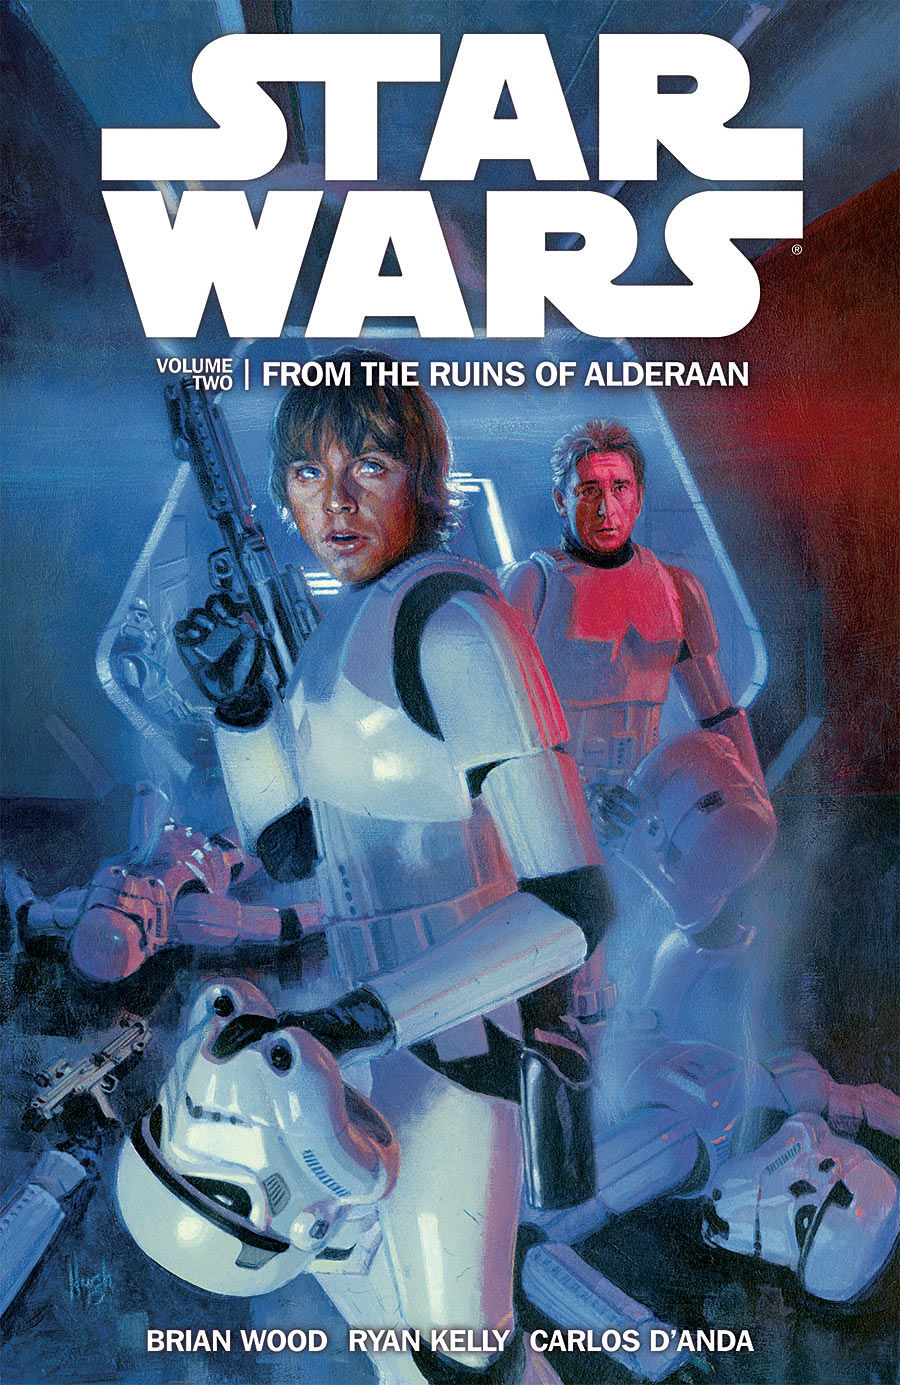 Star Wars Ongoing Graphic Novel Volume 2 From Ruins of Alderaan